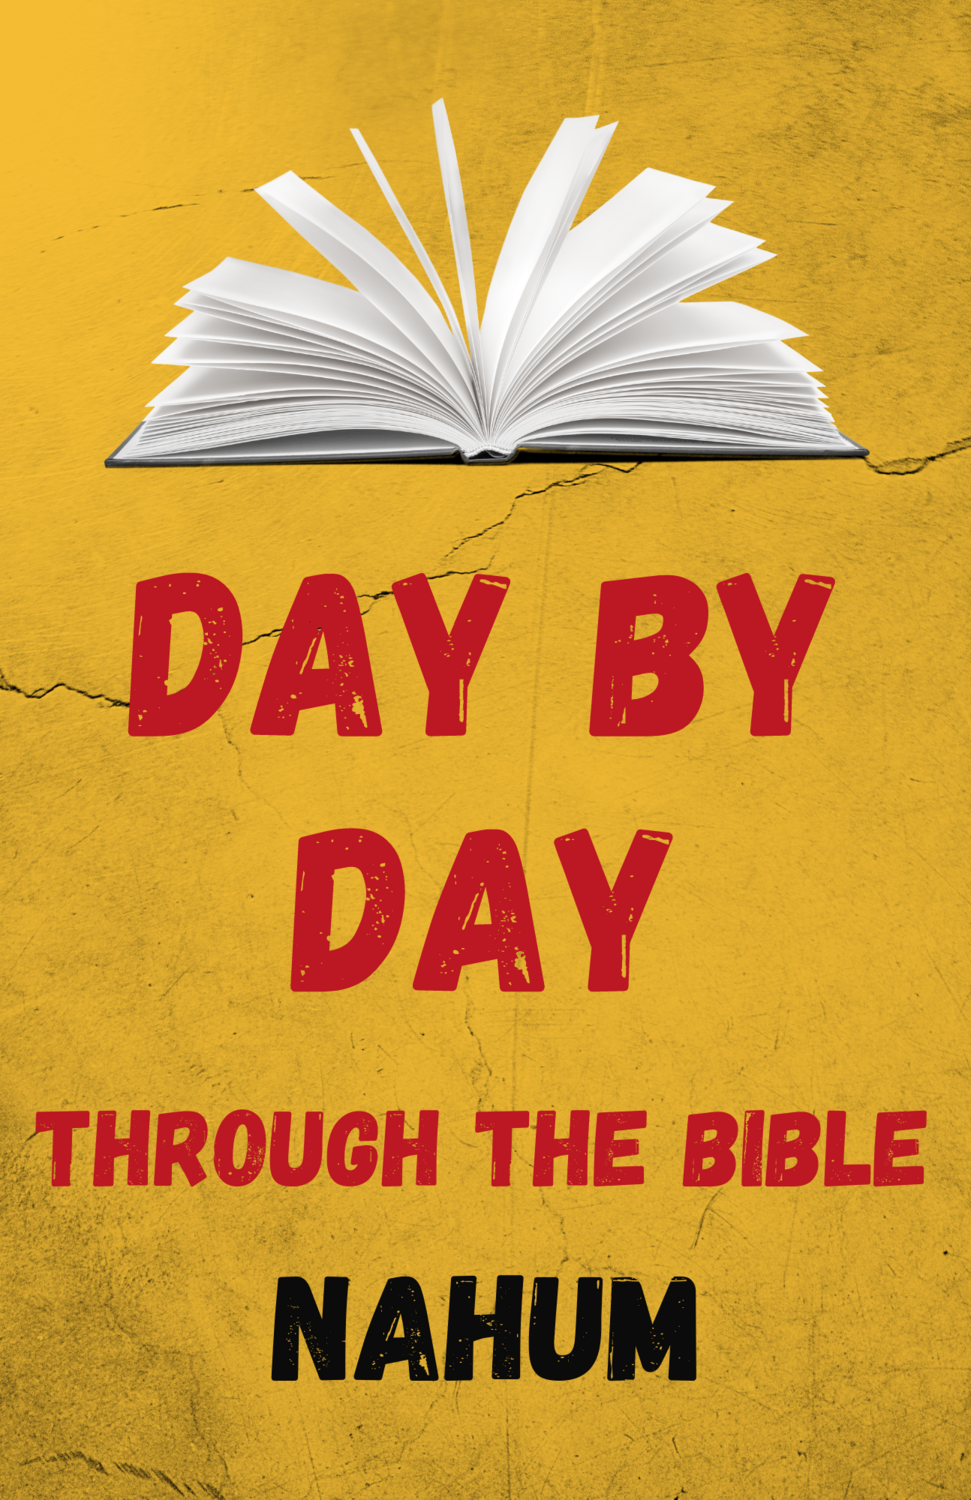 Day by Day Through the Bible: Three Days in Habakkuk - Digital Download